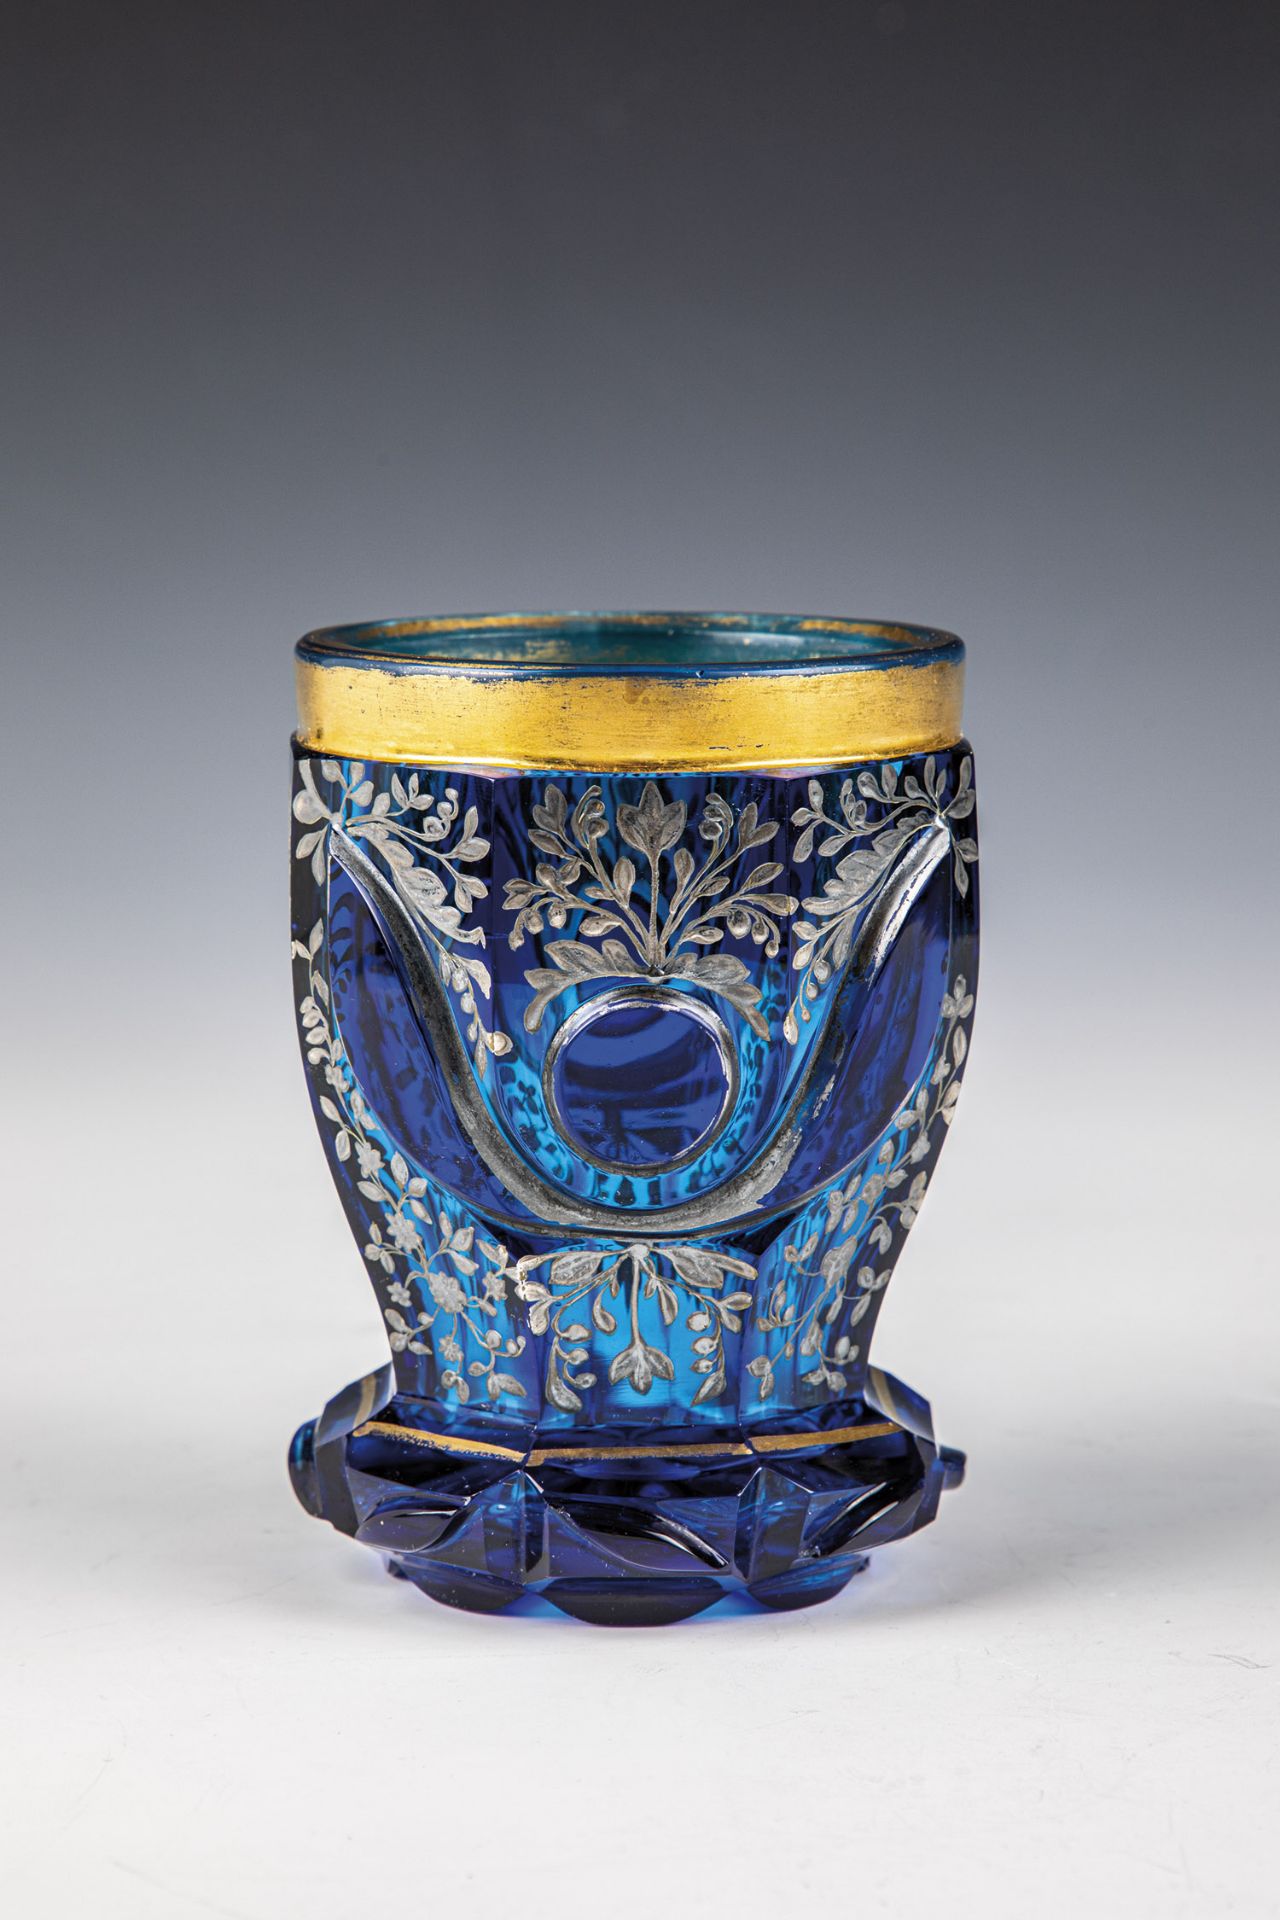 Foot cup North Bohemia, m. 19th century Cobalt blue glass. Bottom with roller finish. Ranft with